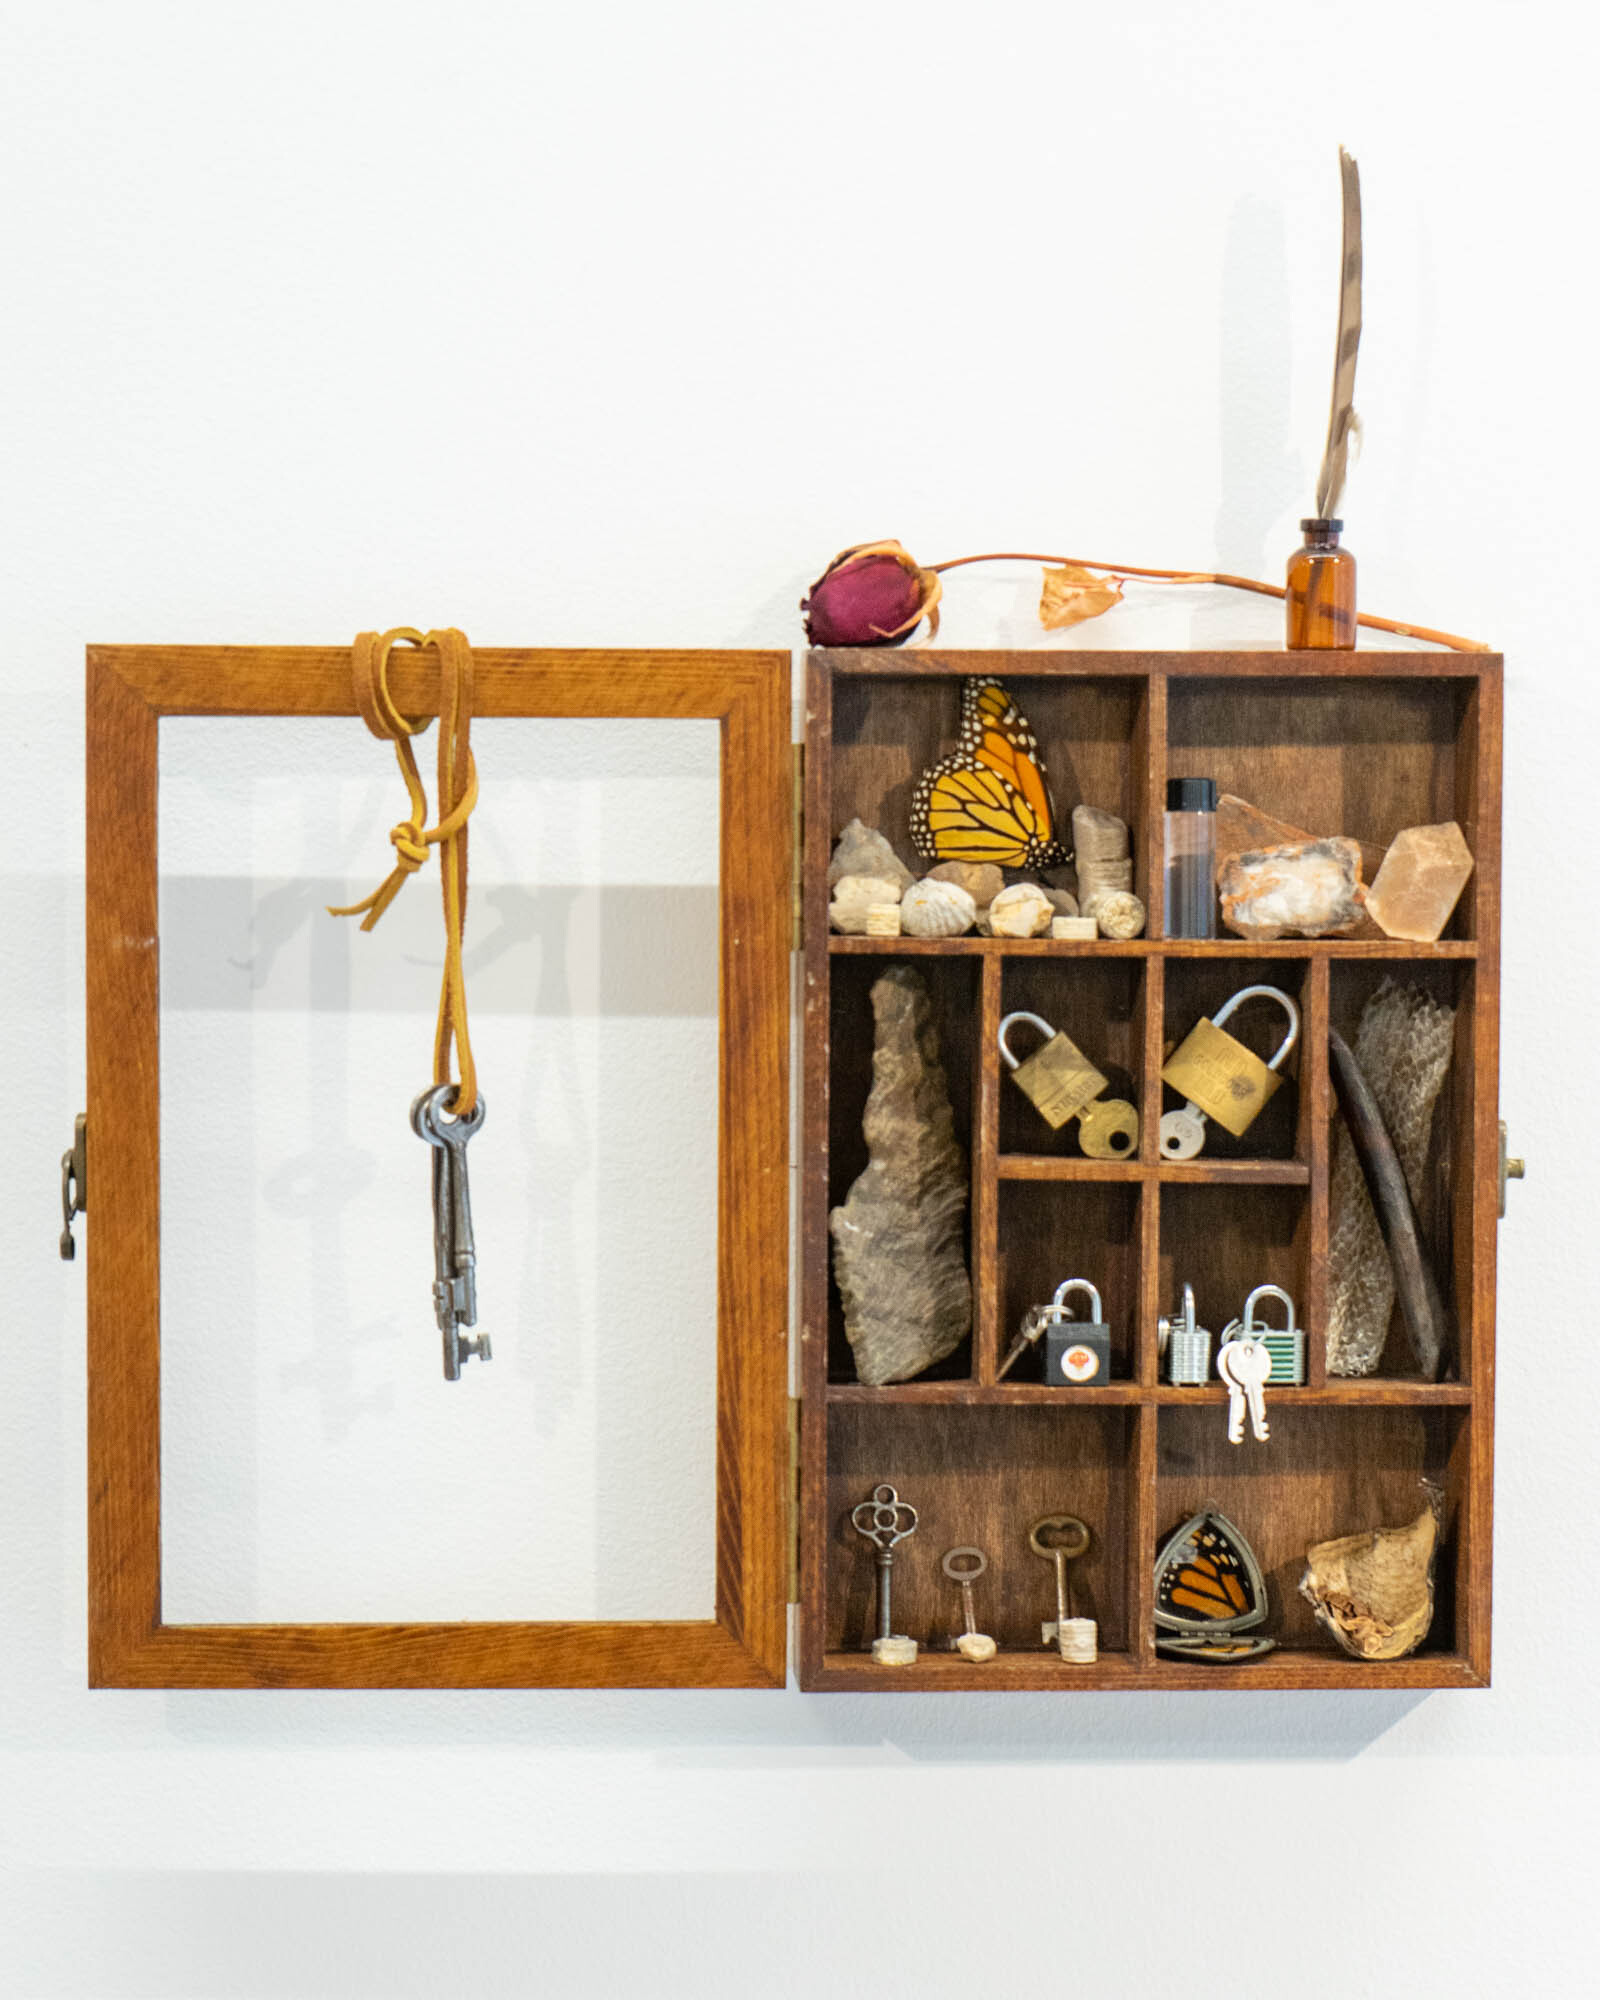 A Shadowbox Holds Stones Keys Locks And Other Small Items